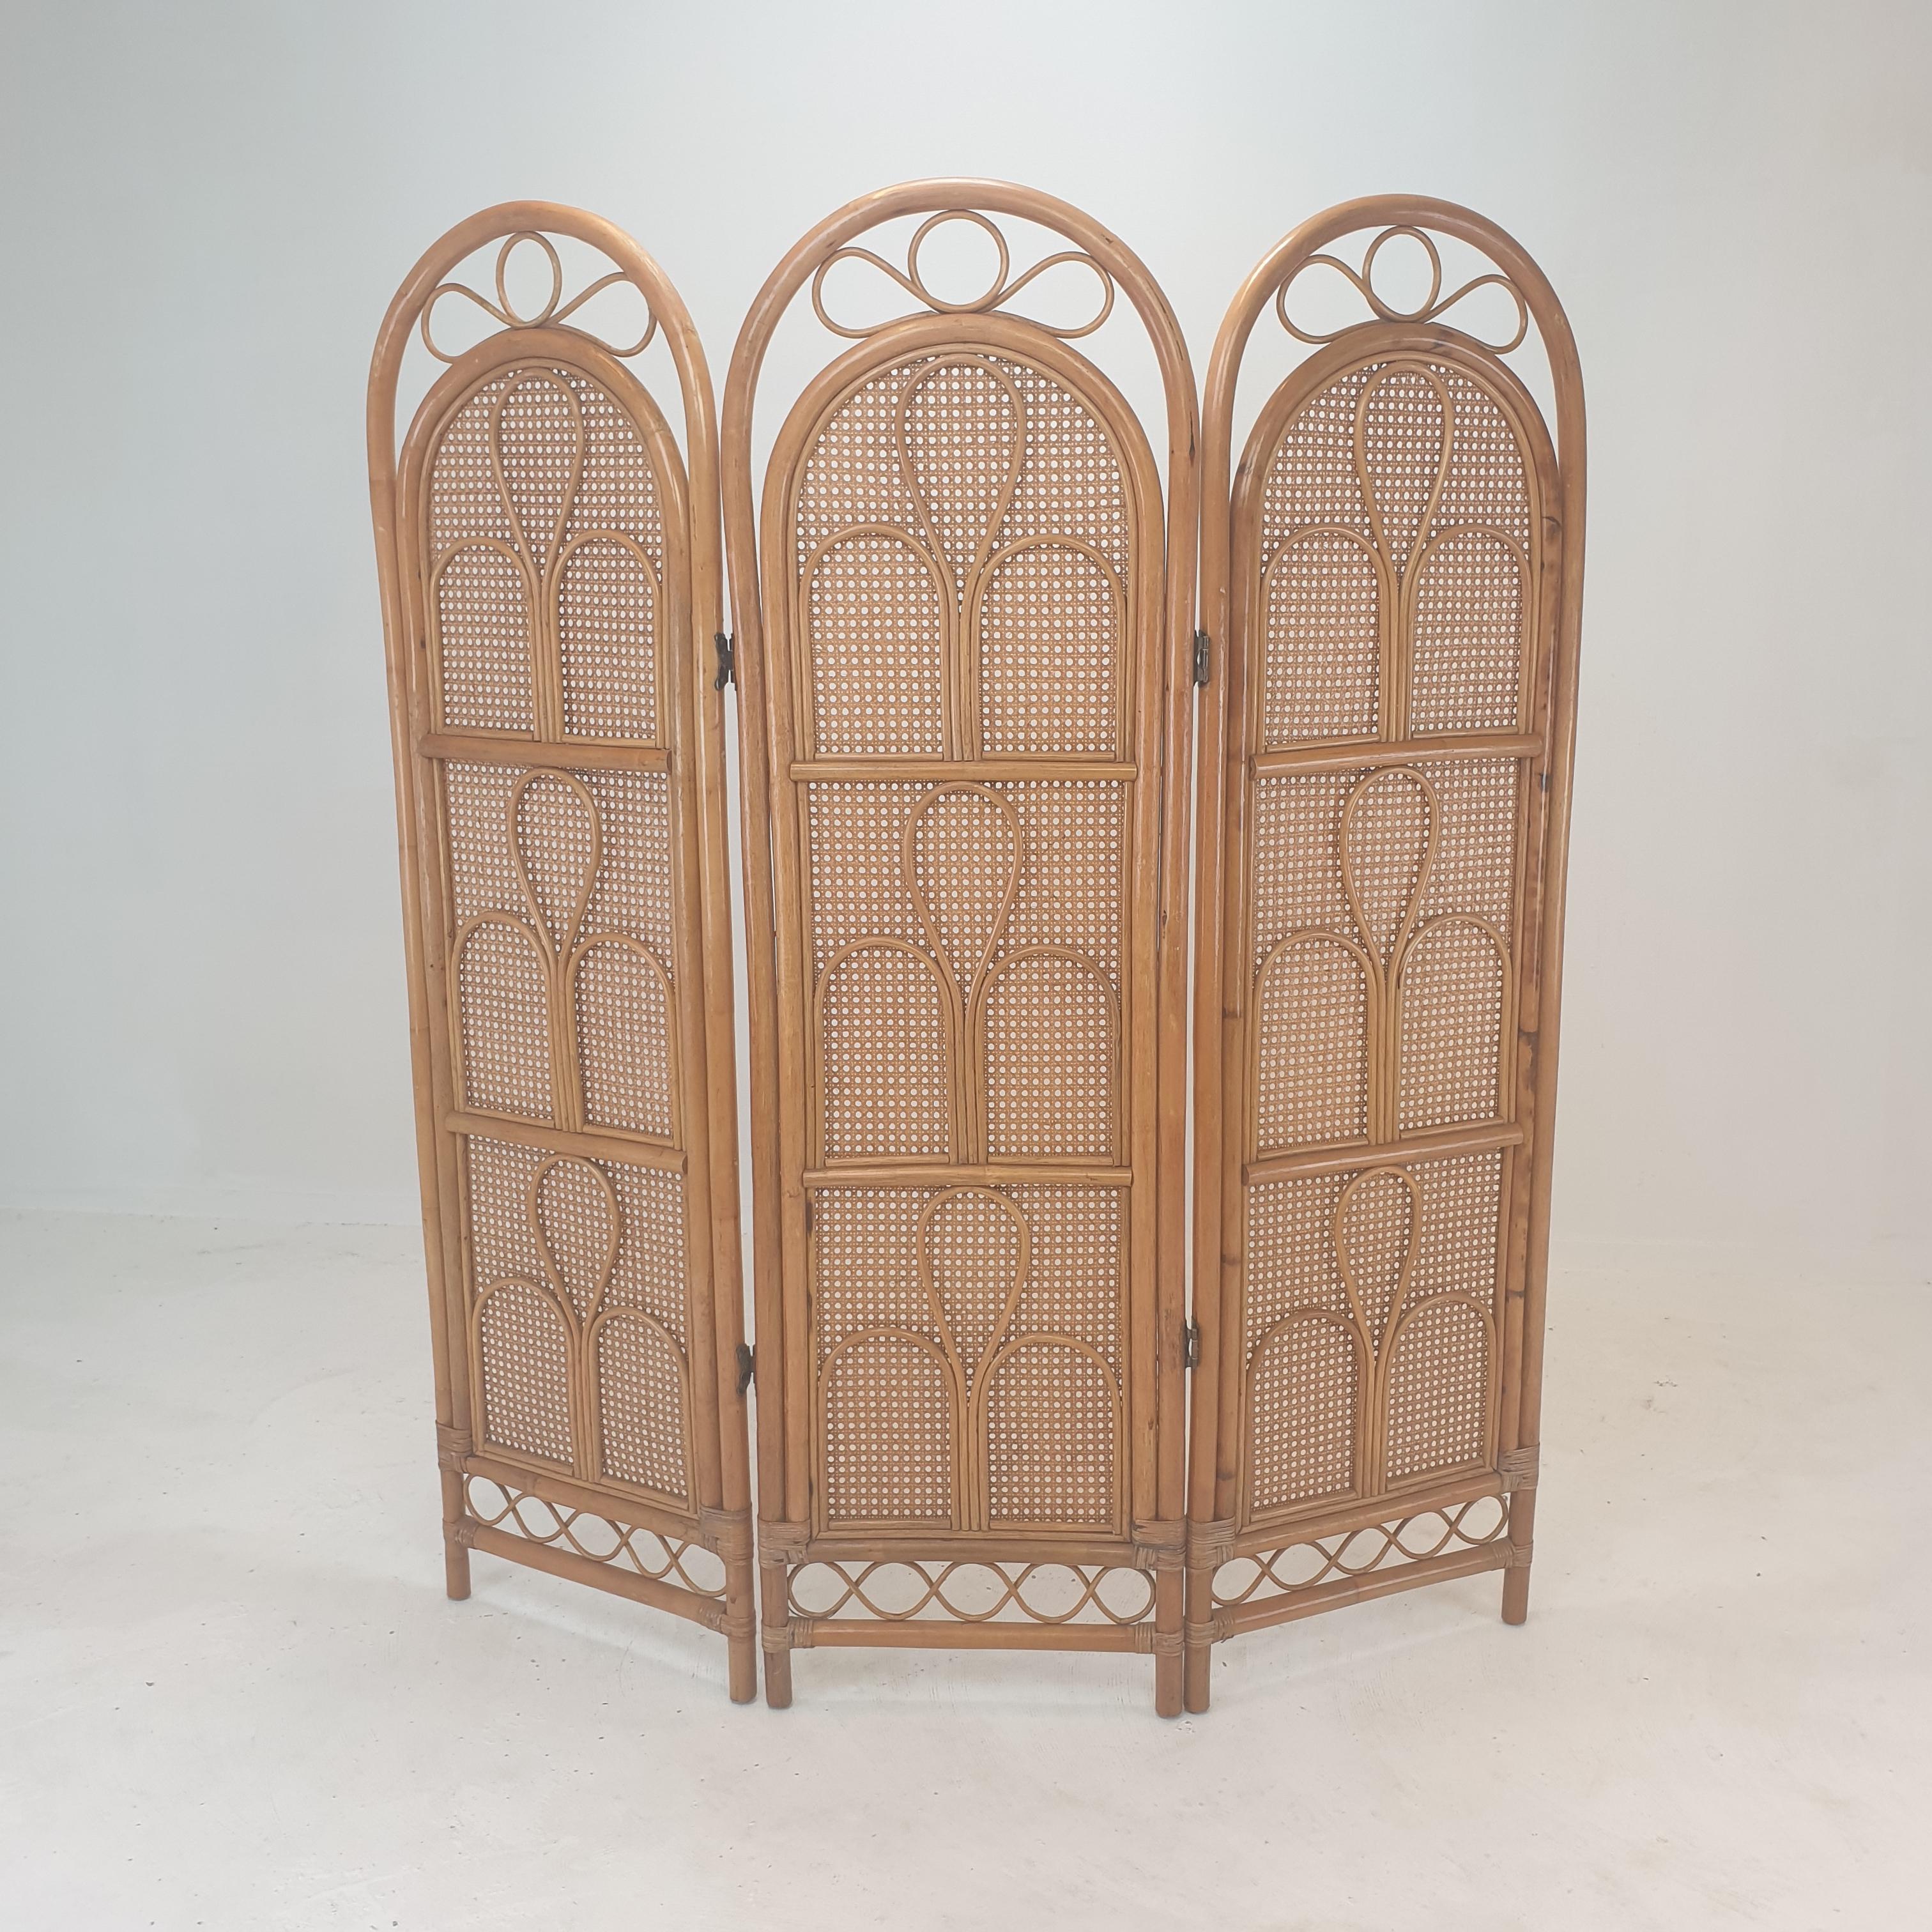 Mid-20th Century Italian Room Divider in Rattan and Wicker, 1960s For Sale